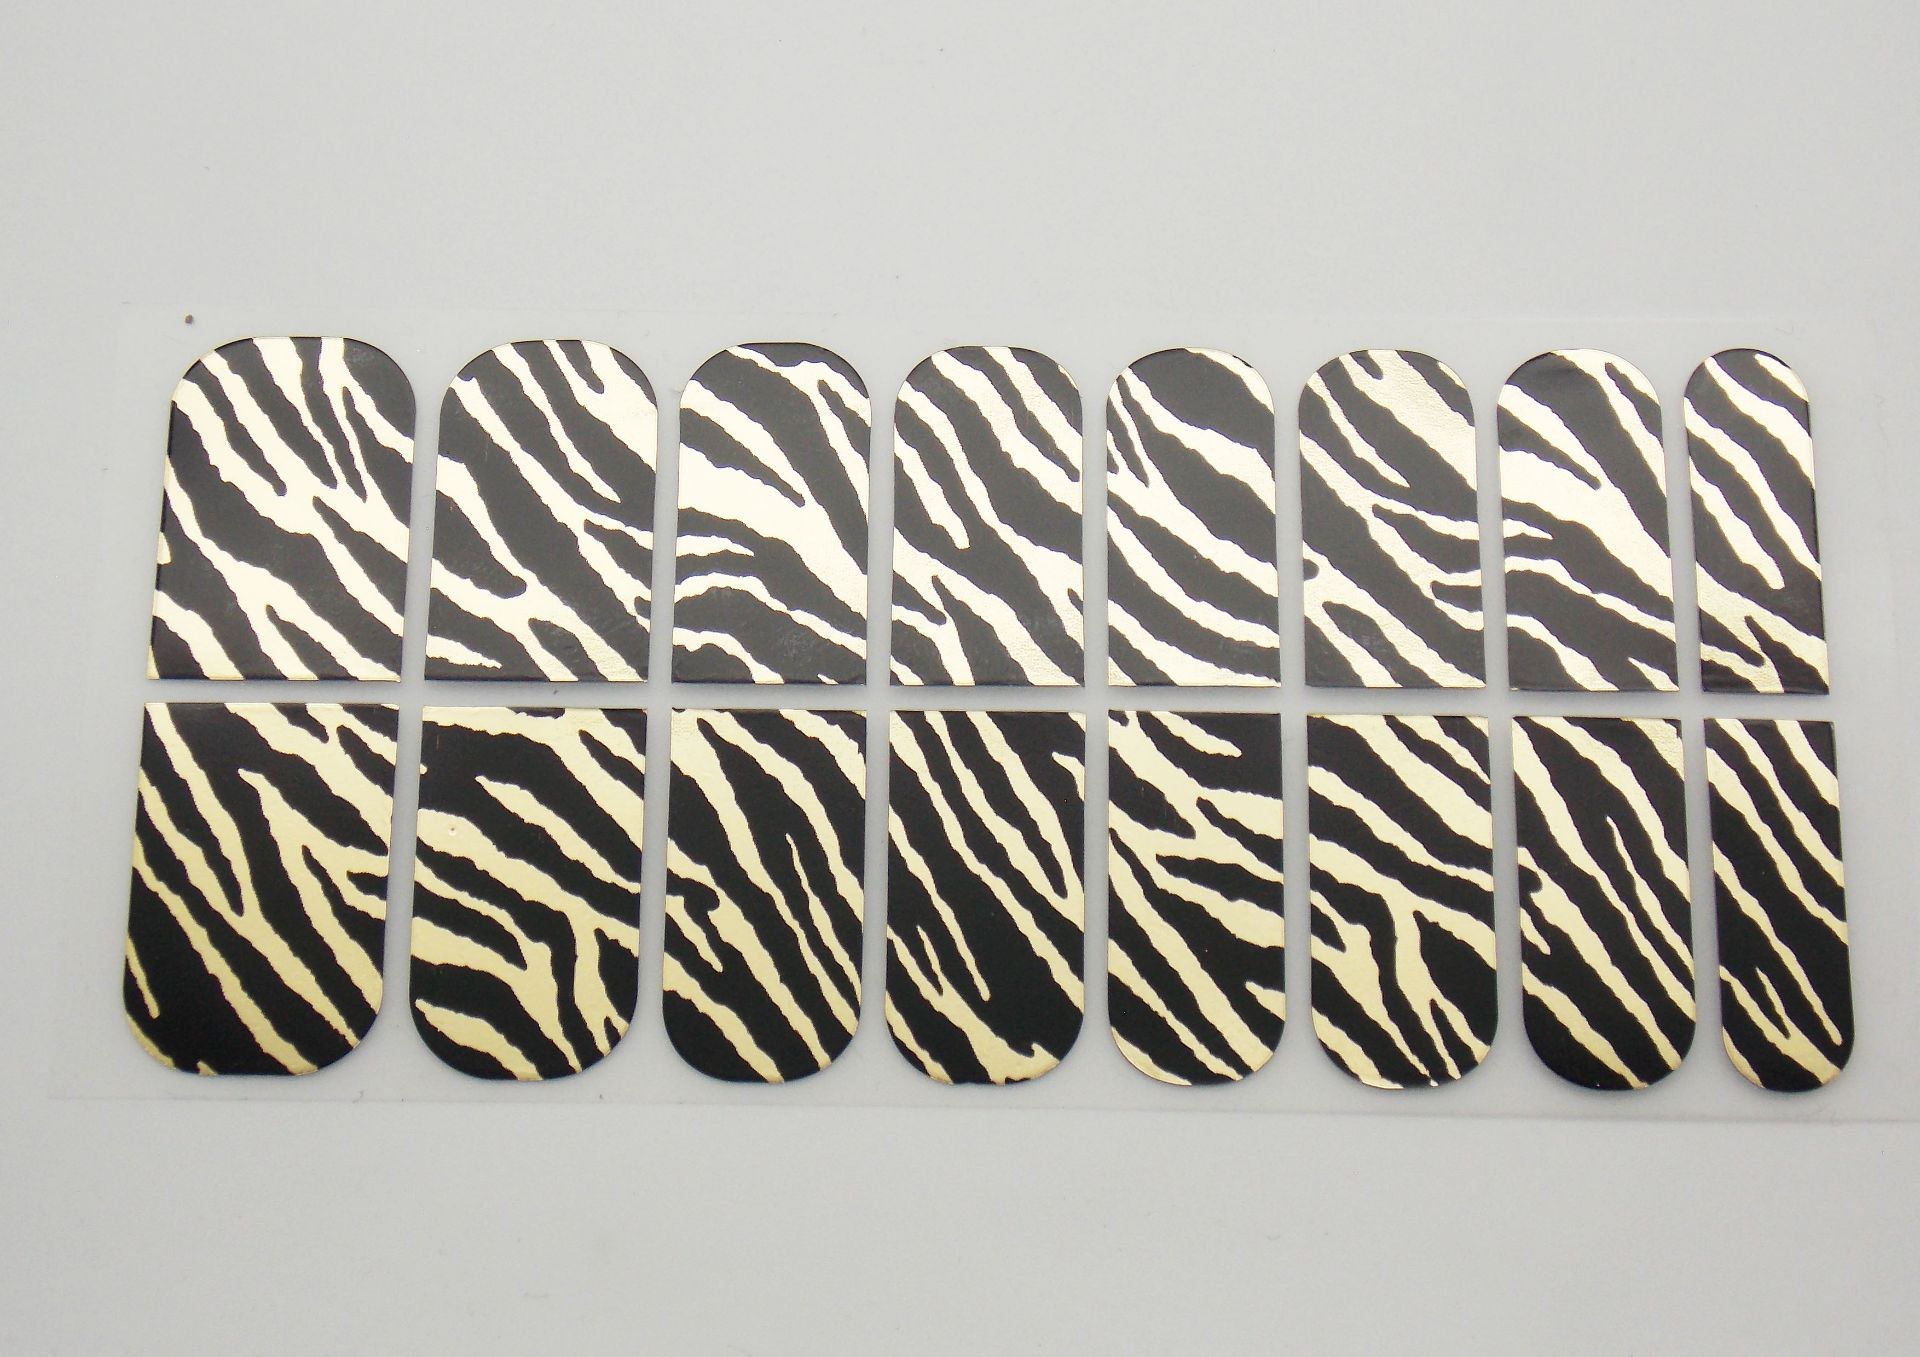 144 Packs Of Professional Nail Art Wrap Transfers - 3 Different Animal Print Styles - Image 7 of 9